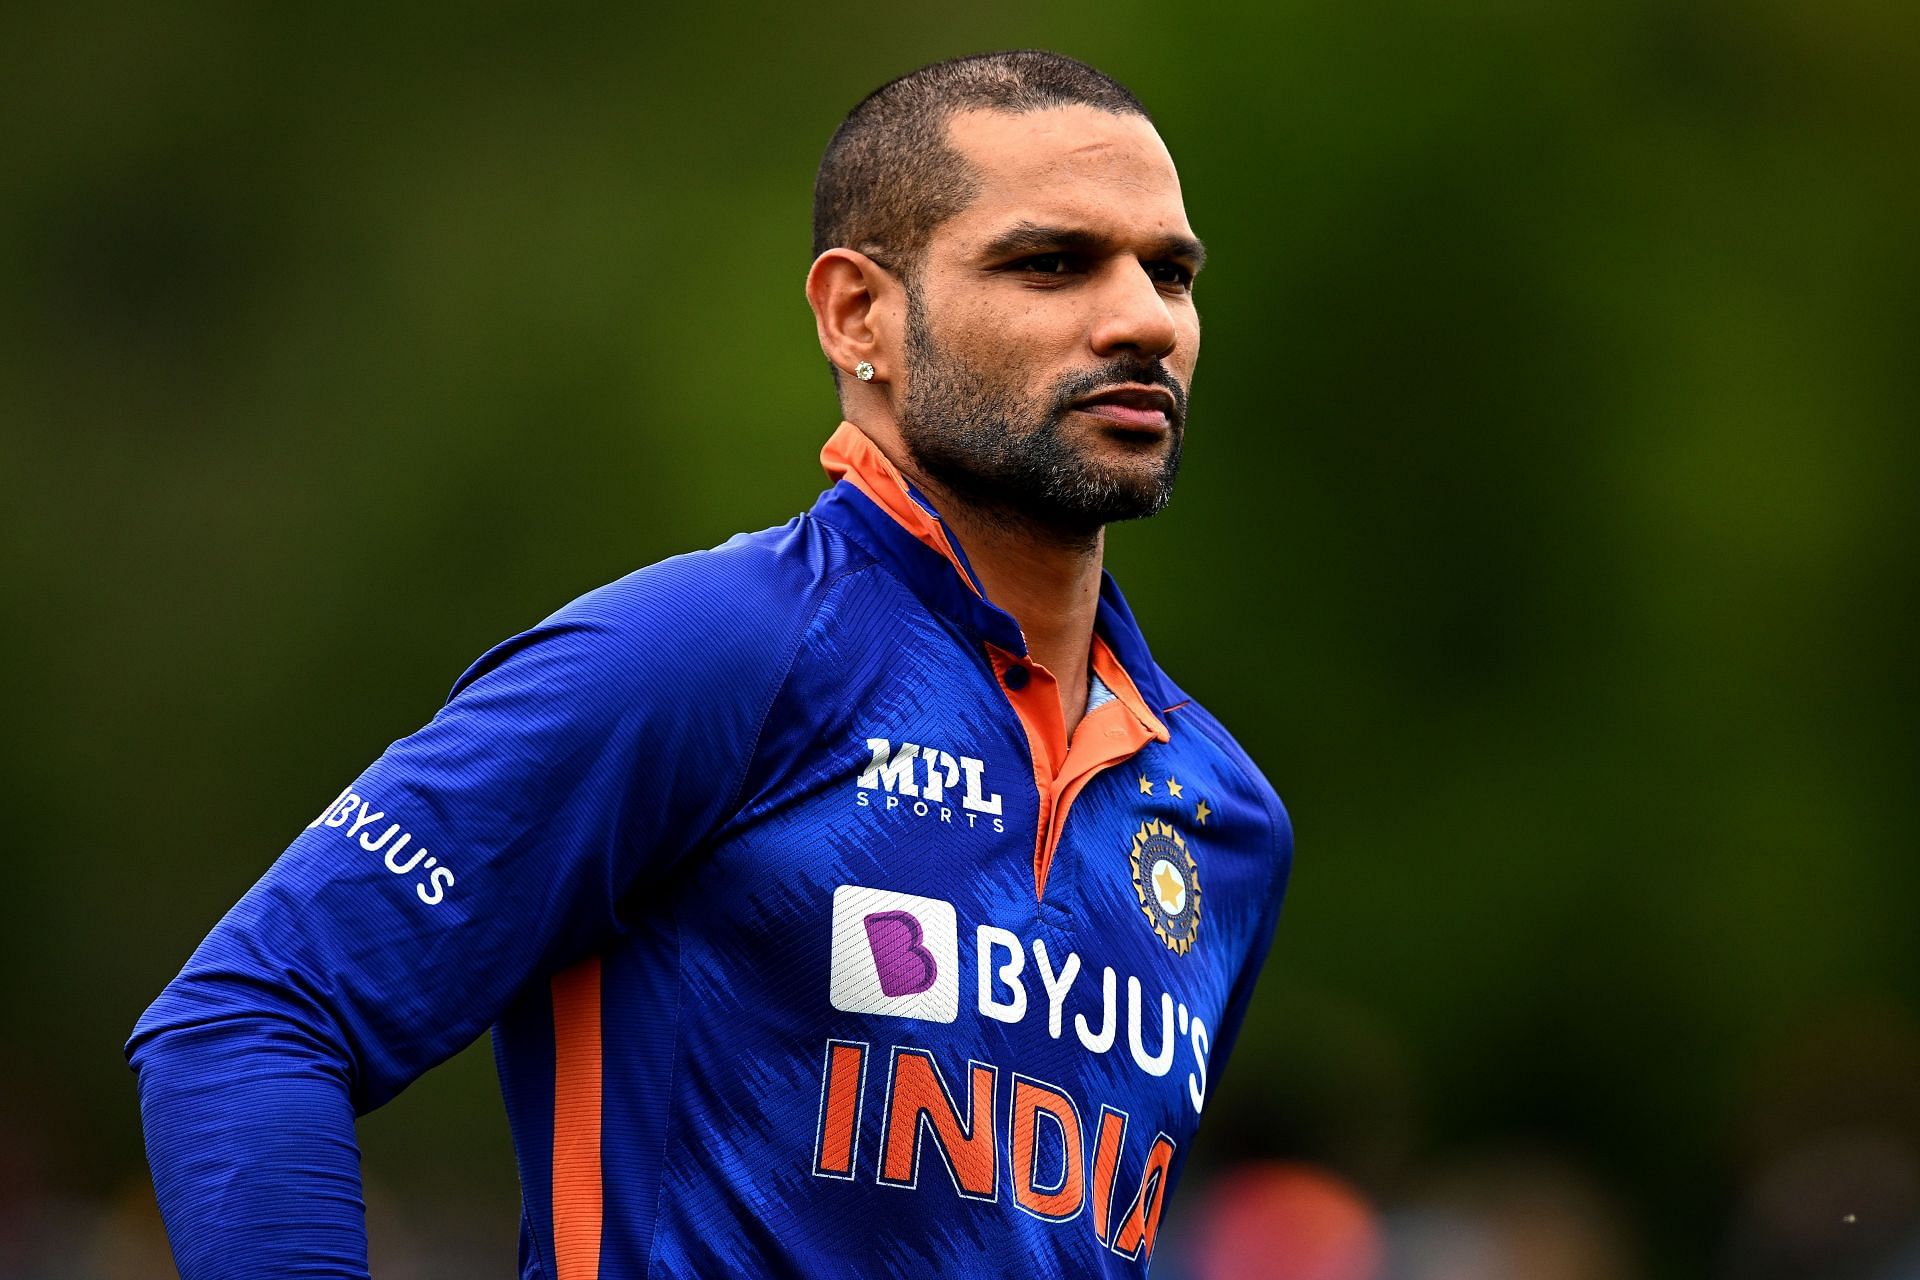 India's playing 11 from Shikhar Dhawan's ODI debut in 2010 - where are they now? 